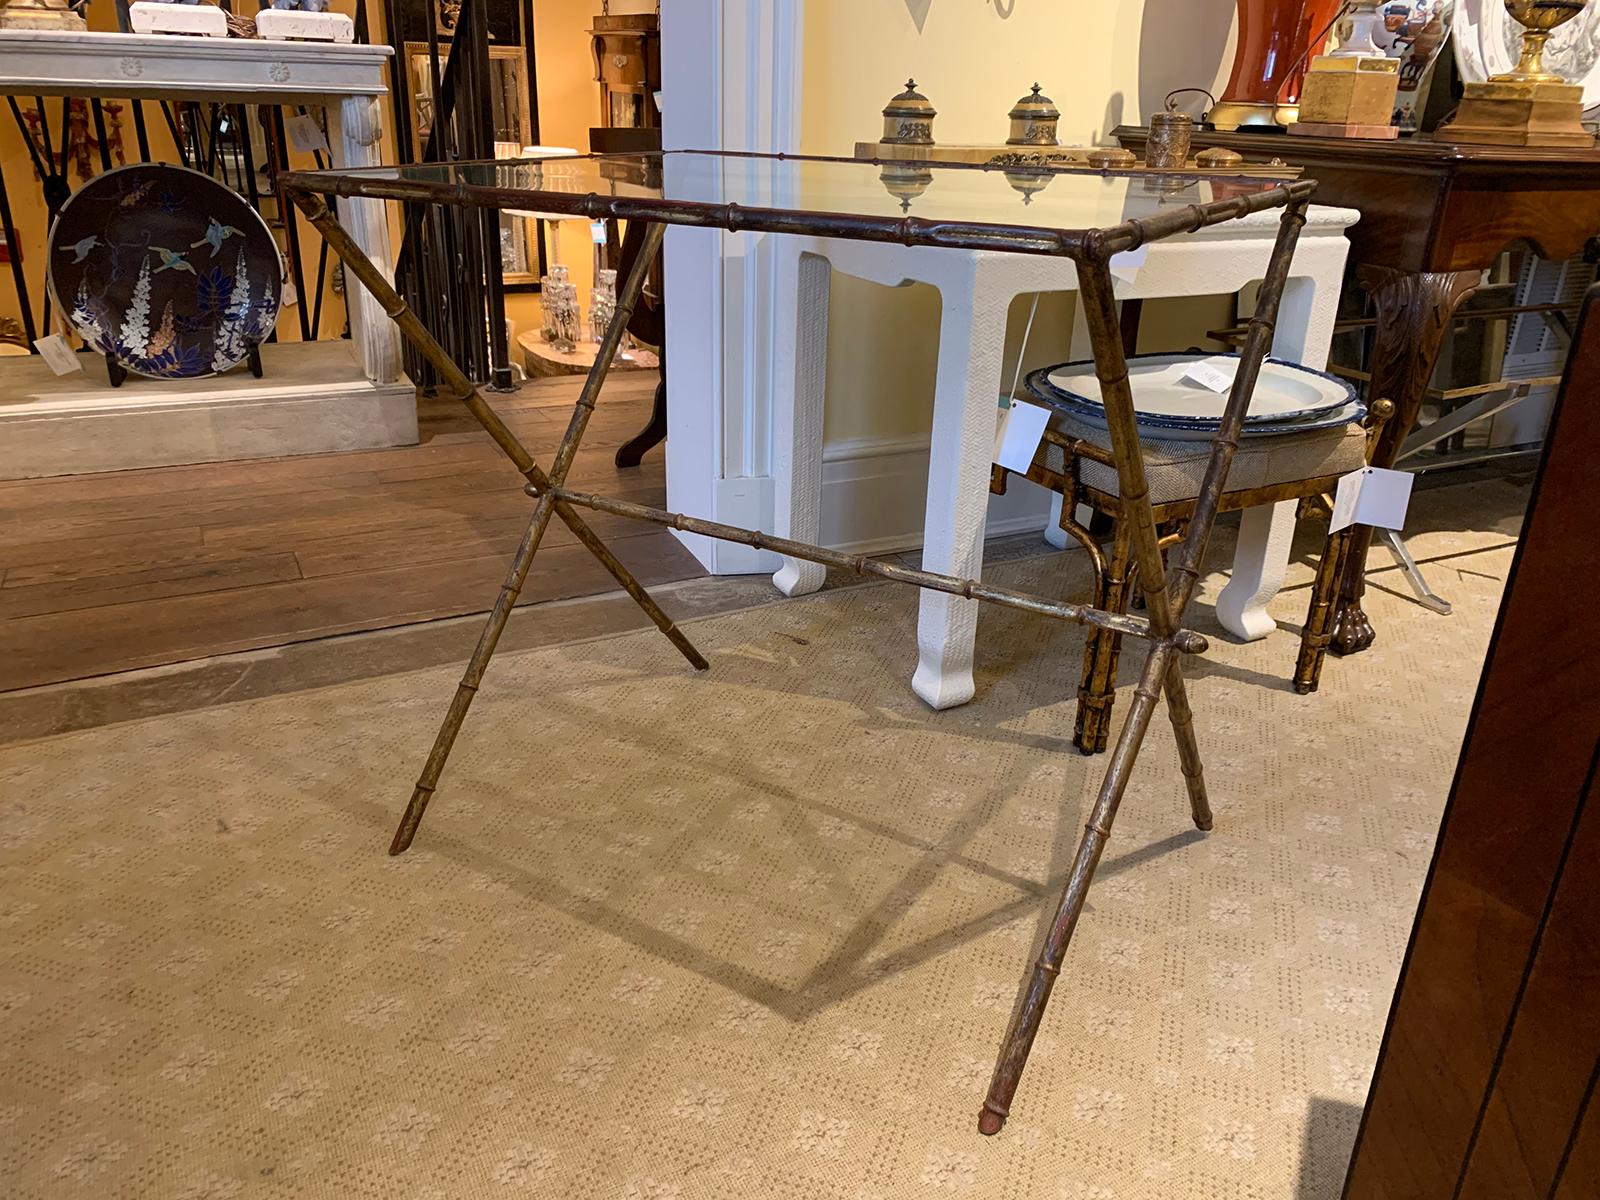 Maison Jansen style mid-20th century gilded faux bamboo side table with glass top.